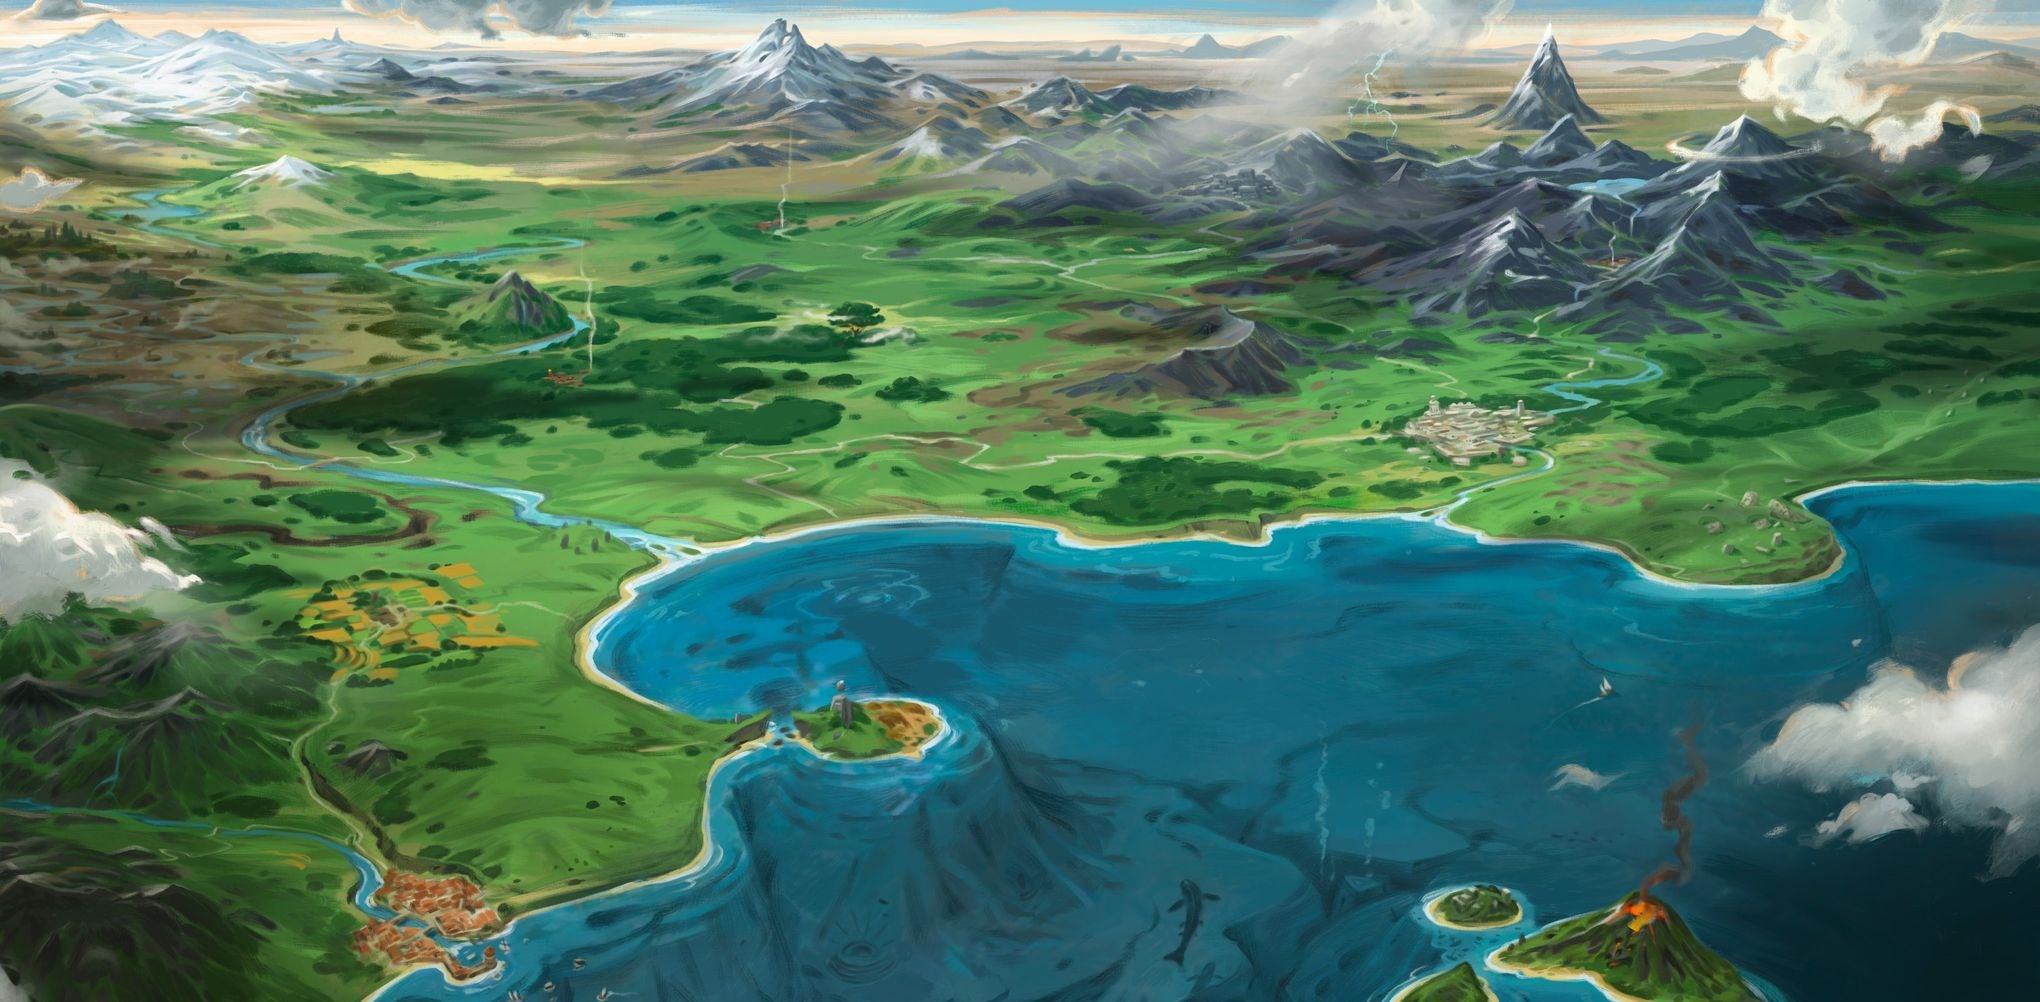 Image for The Wanderer’s Guide packs a campaign of creativity into an RPG fantasy atlas